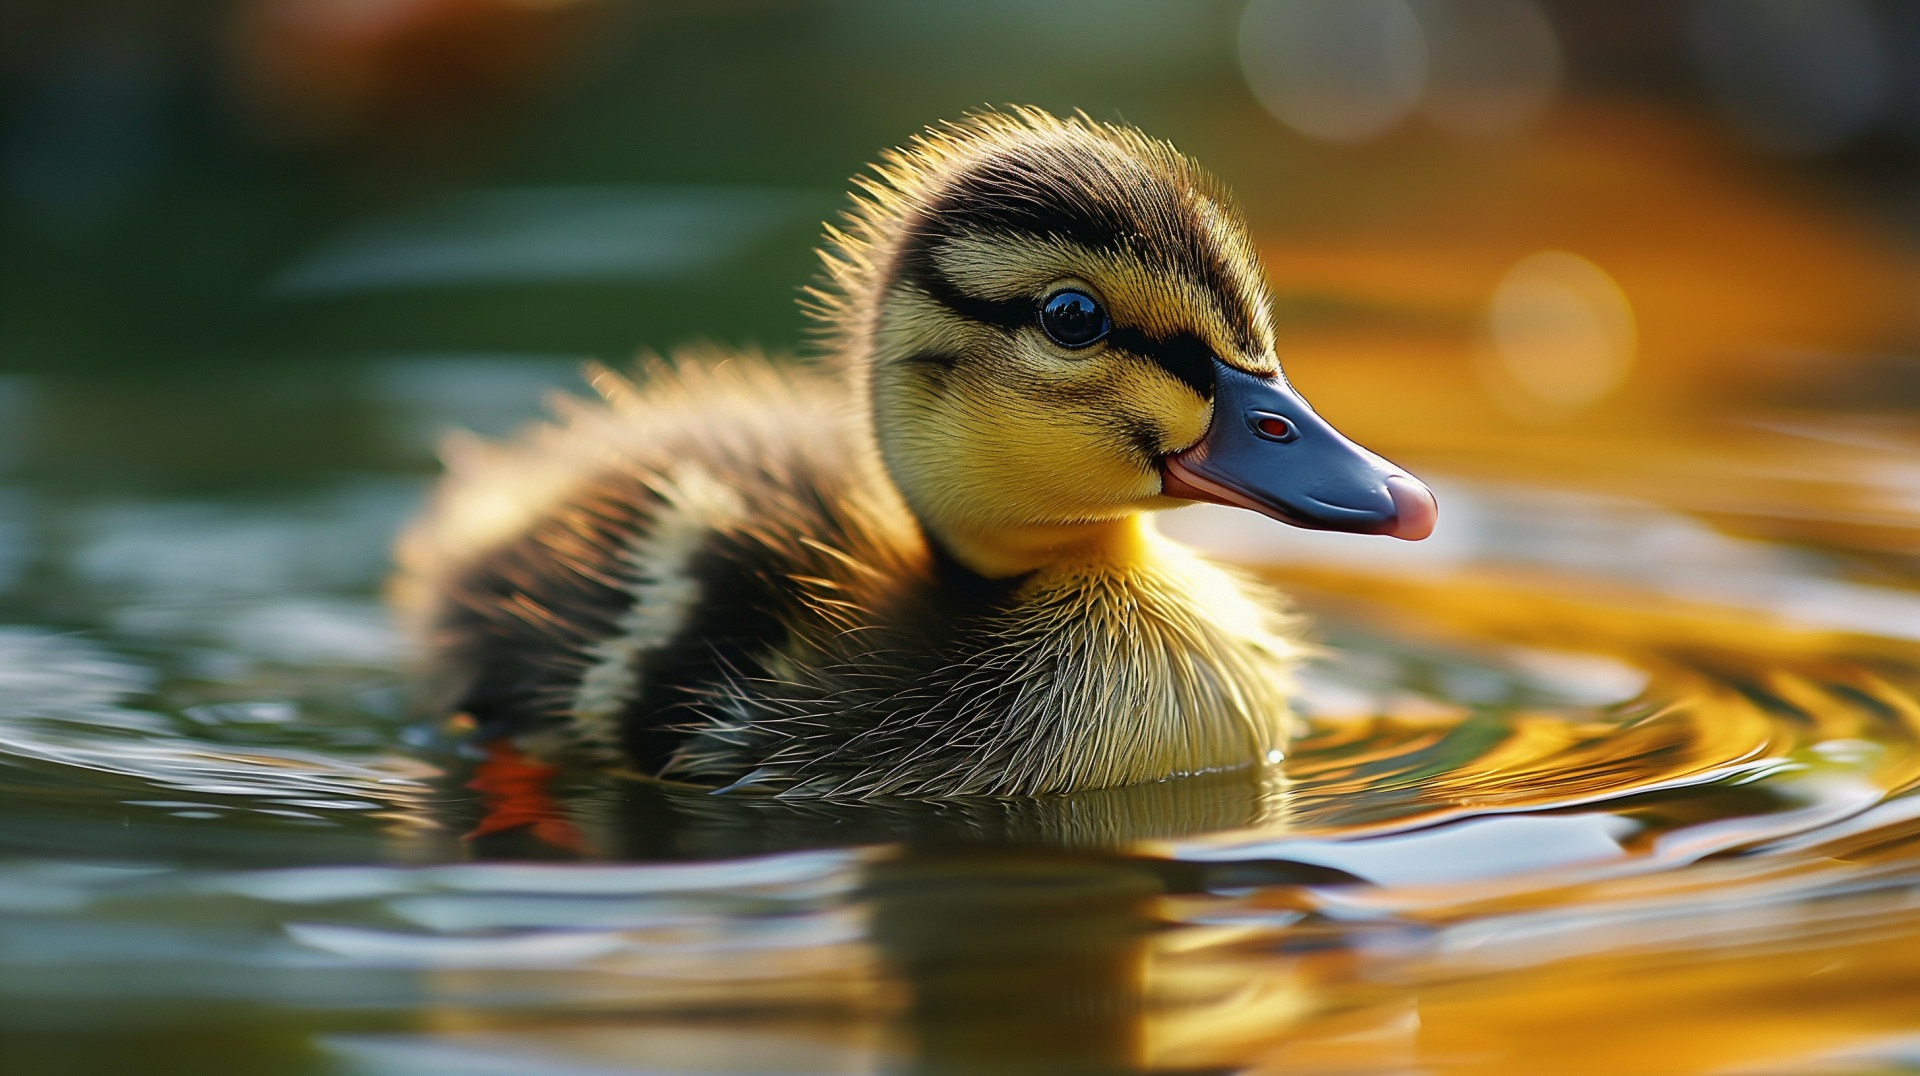 Duckling Cute Mobile Phone Wallpaper | PSD Free Download - Pikbest